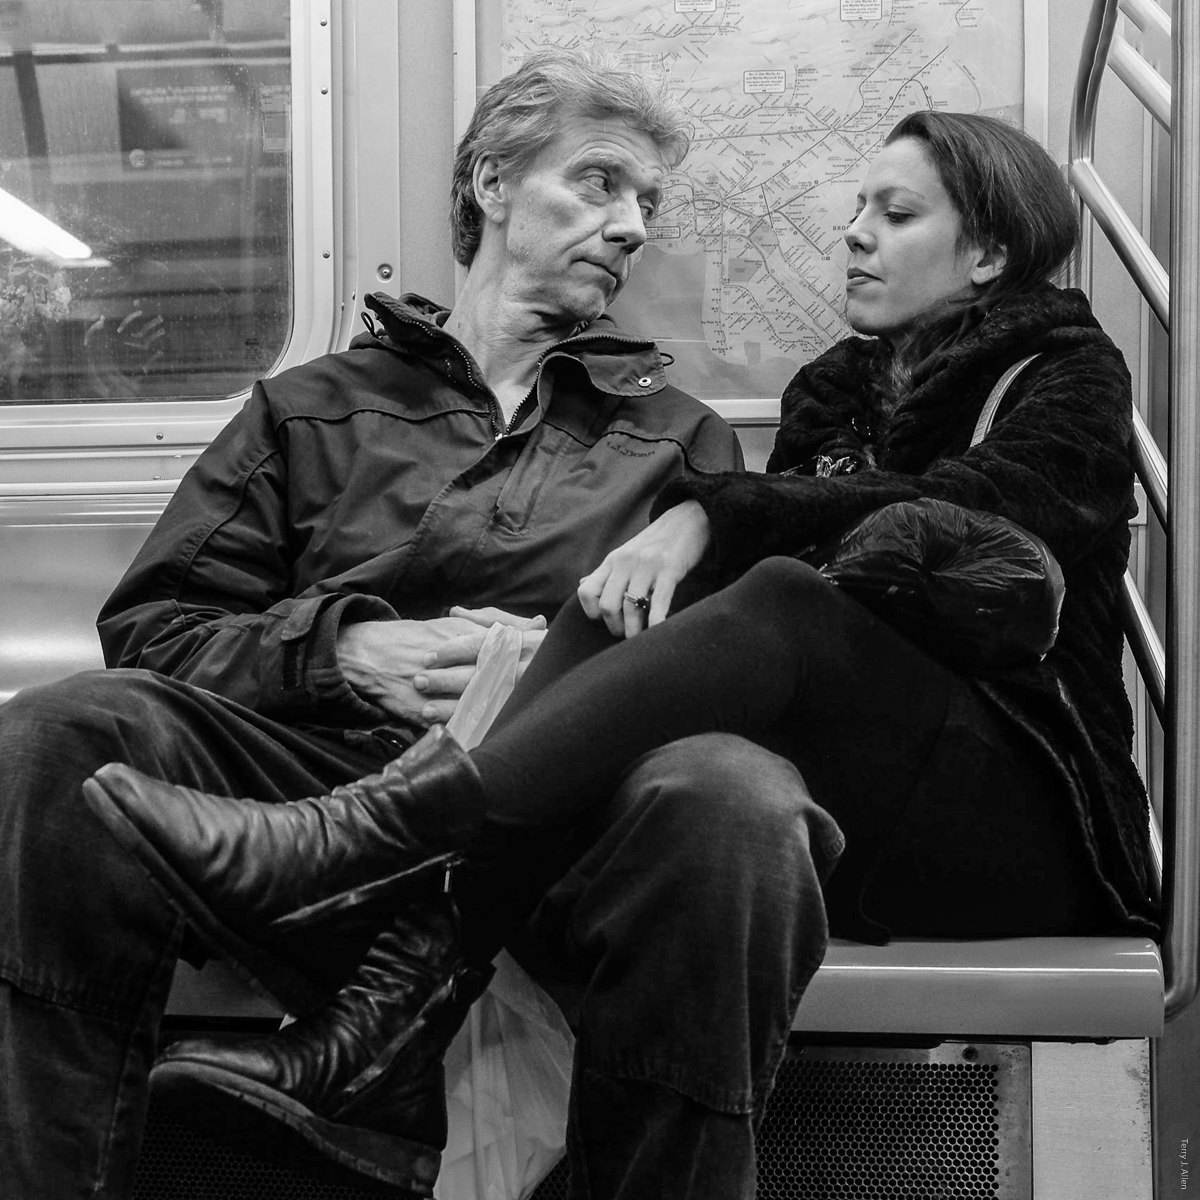 Lovers on a train